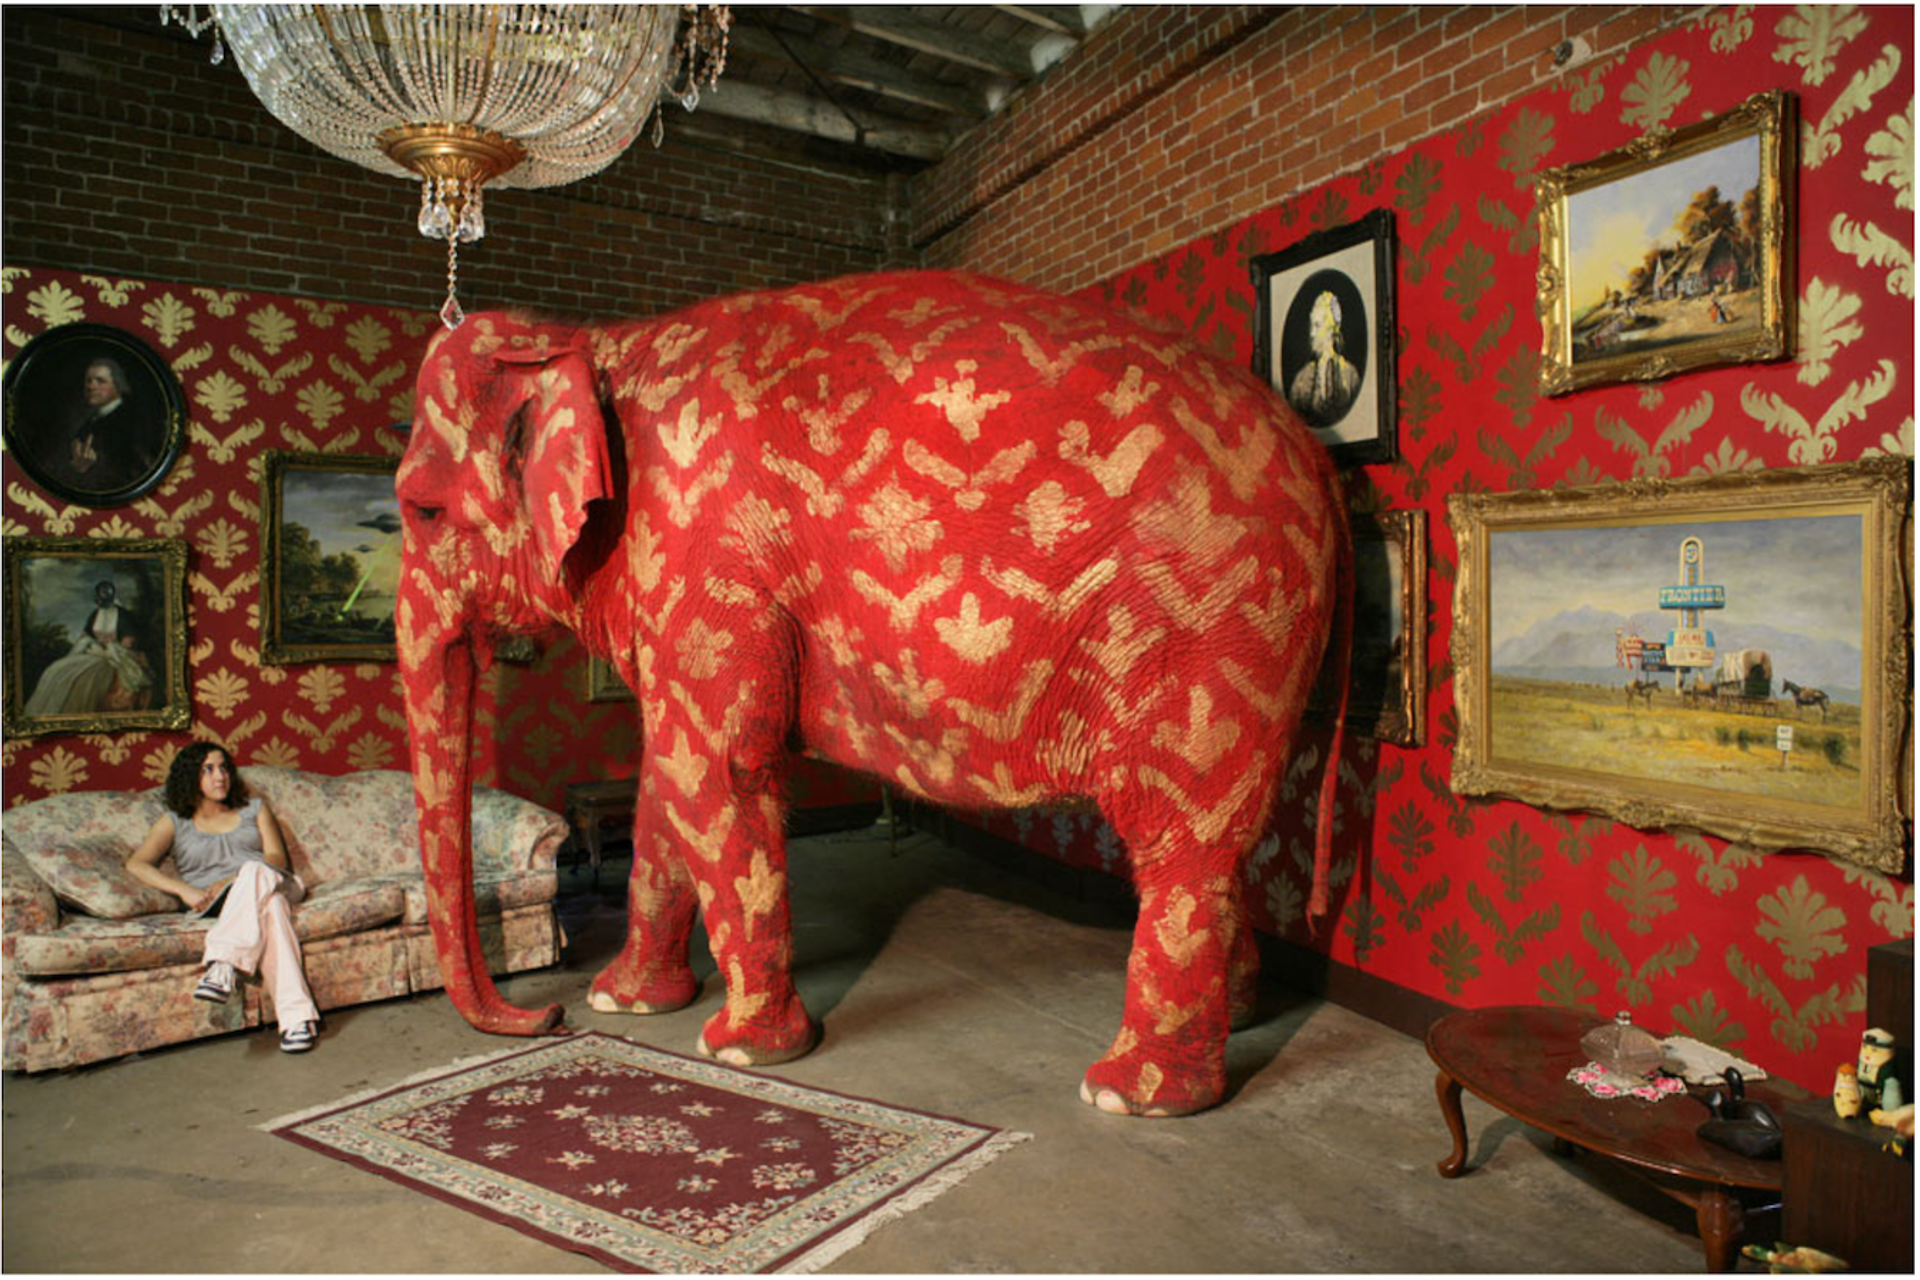 A photo from Banksy's Barely Legal exhibition, capturing a red and gold painted elephant in a room adorned with antique paintings on the walls, an oriental rug, and a couch where a woman is seated, observing the elephant.